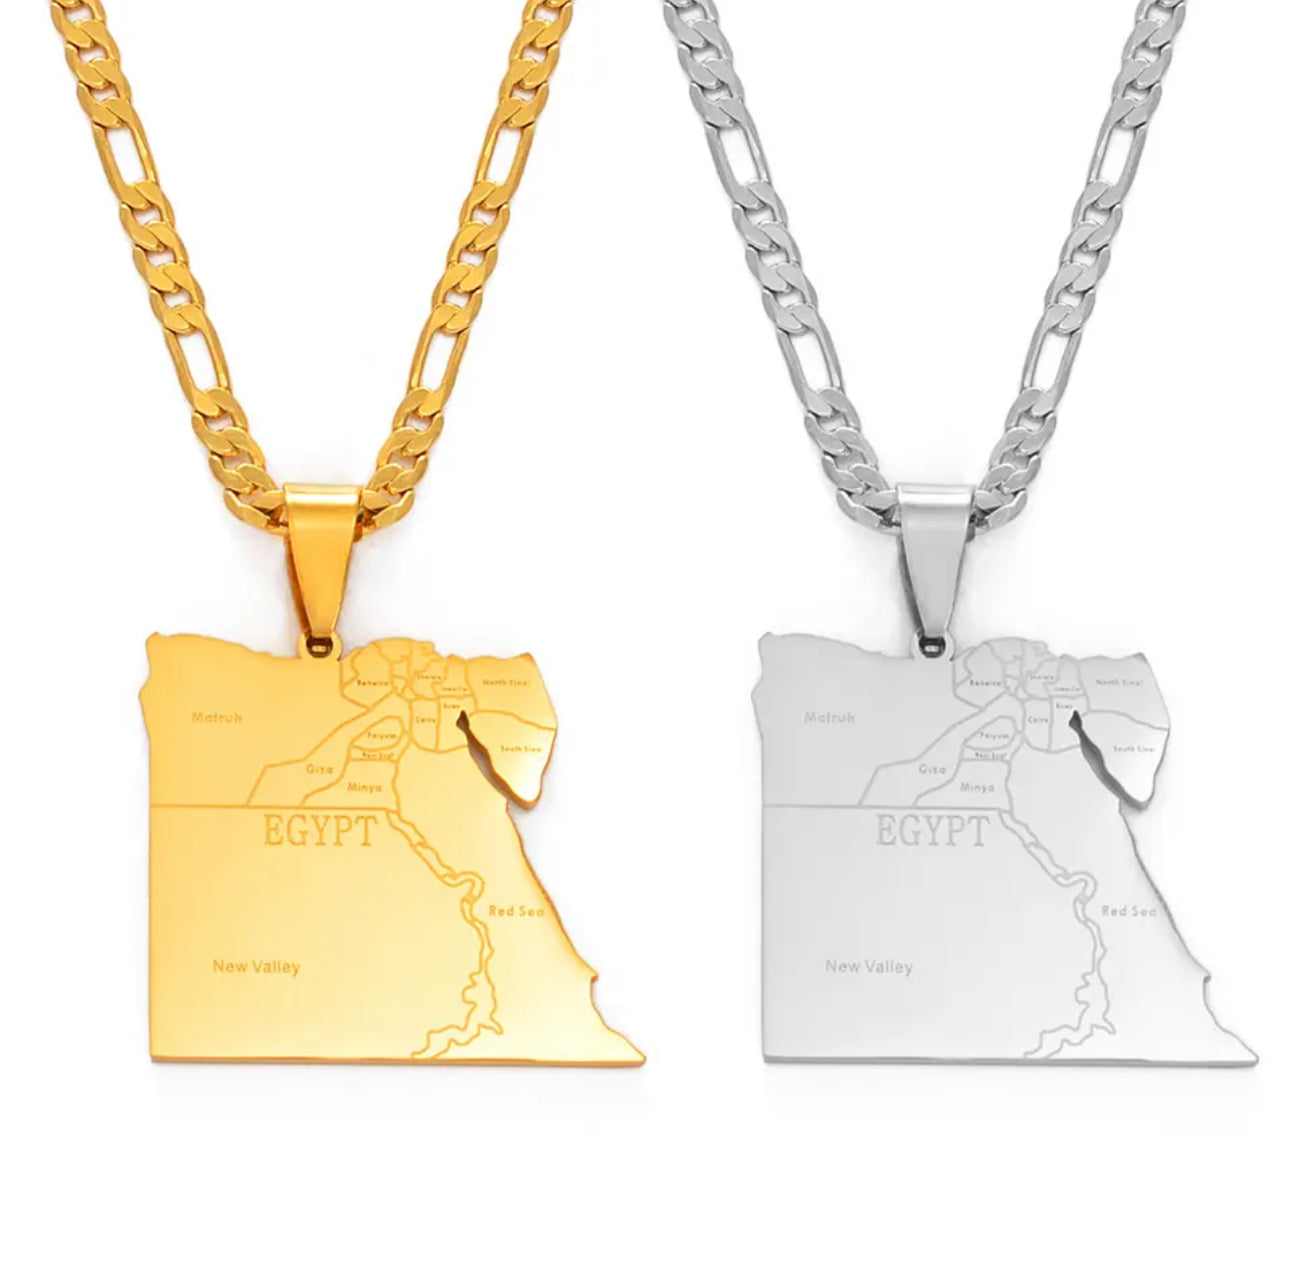 Egypt Map & Cities Necklace